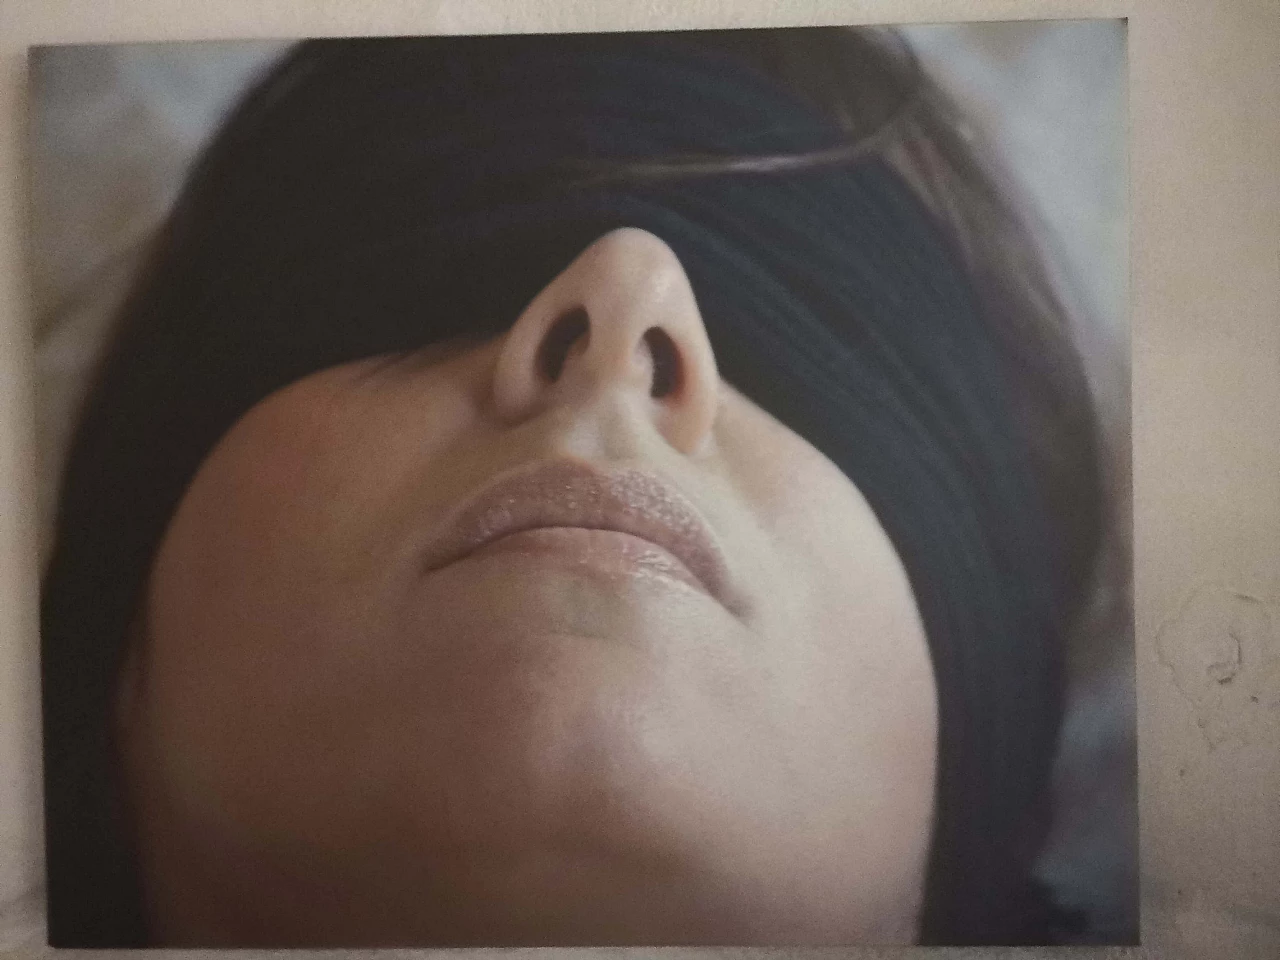 Photograph by P. Pazzi, Portrait of a blindfolded woman, 2000s. 1230213